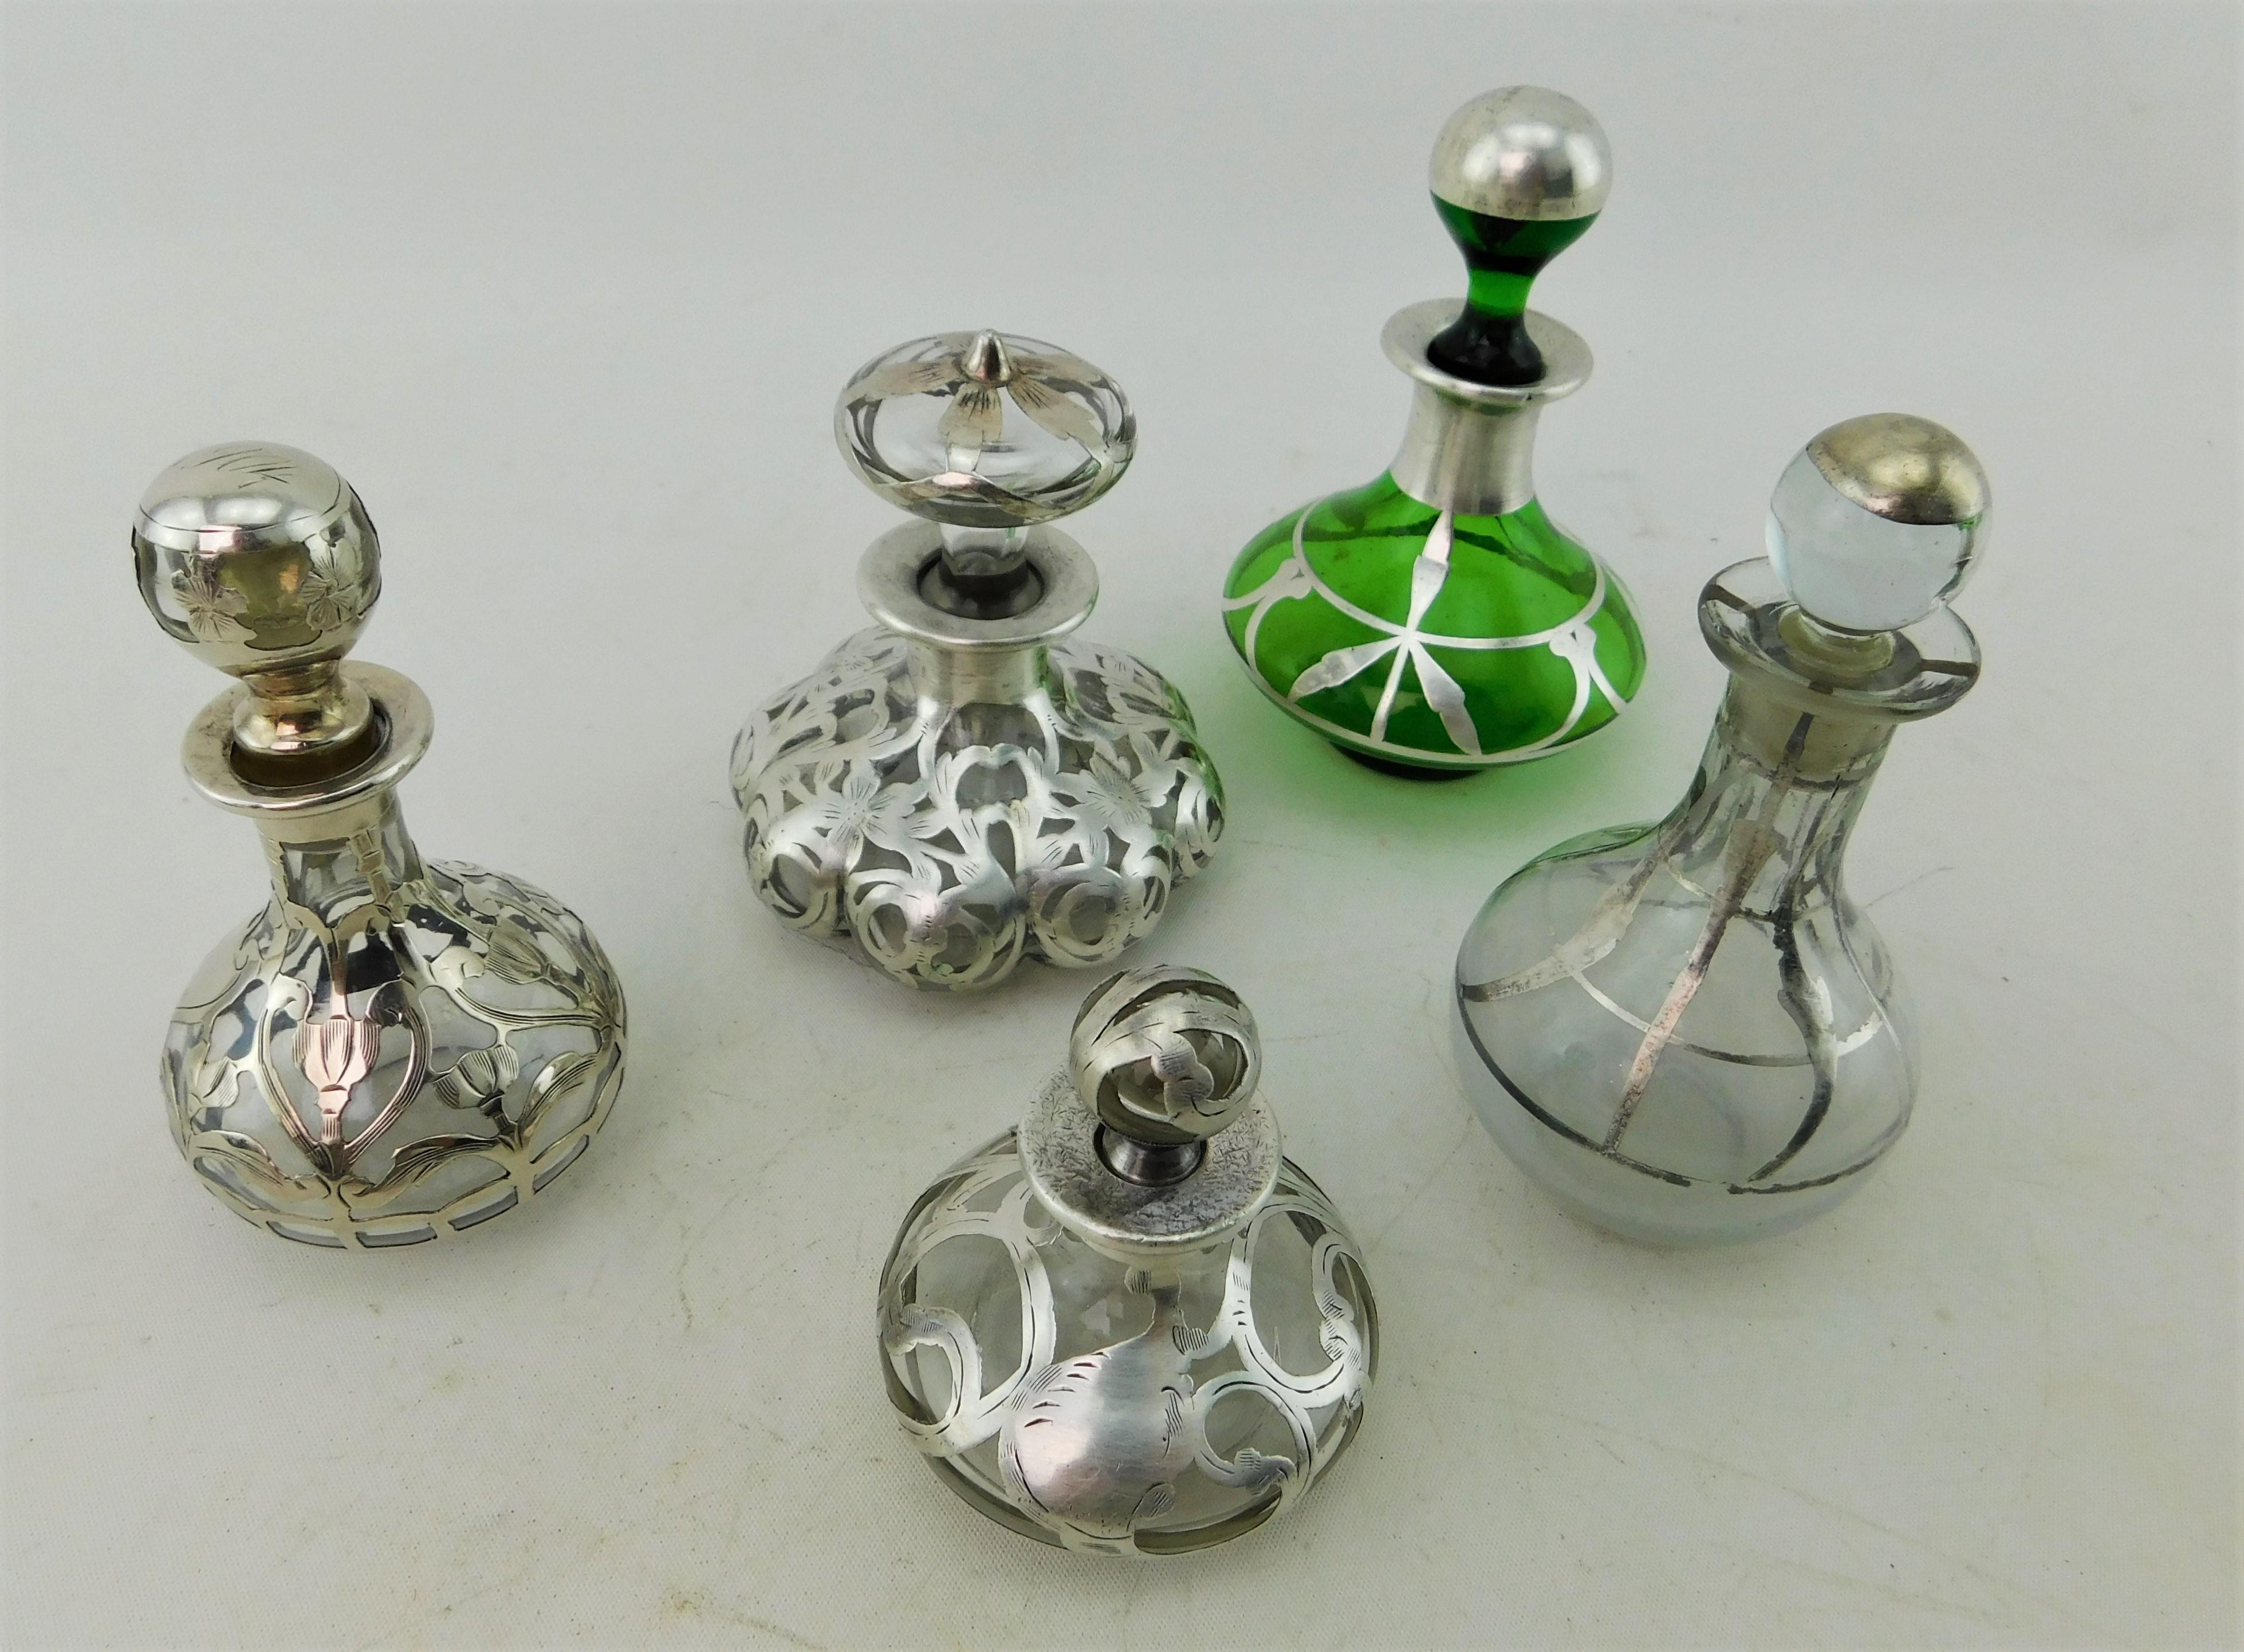 This collection of five late 19th century/early 20th century (circa 1890-1910) perfume bottles with lids/stoppers (note stoppers are interchangeable).  Of European make possibly English but no makers marks except 1904 engraved on one bottle.
They